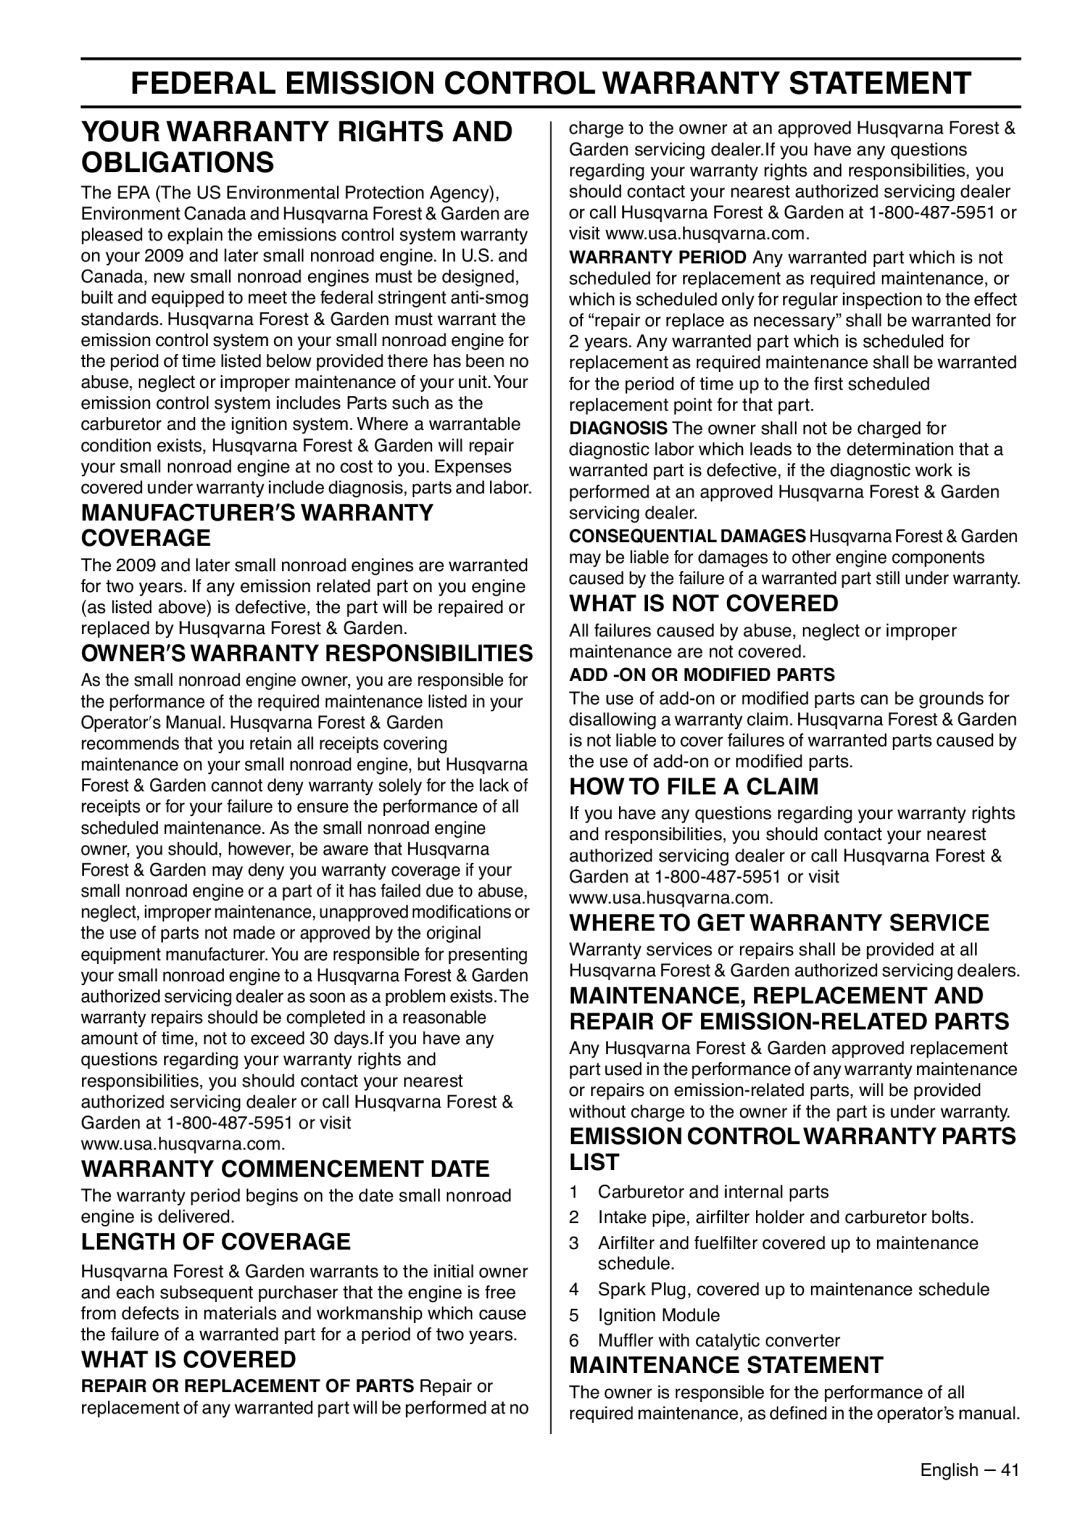 Husqvarna 1151437-95 Federal Emission Control Warranty Statement, Your Warranty Rights And Obligations, Length Of Coverage 